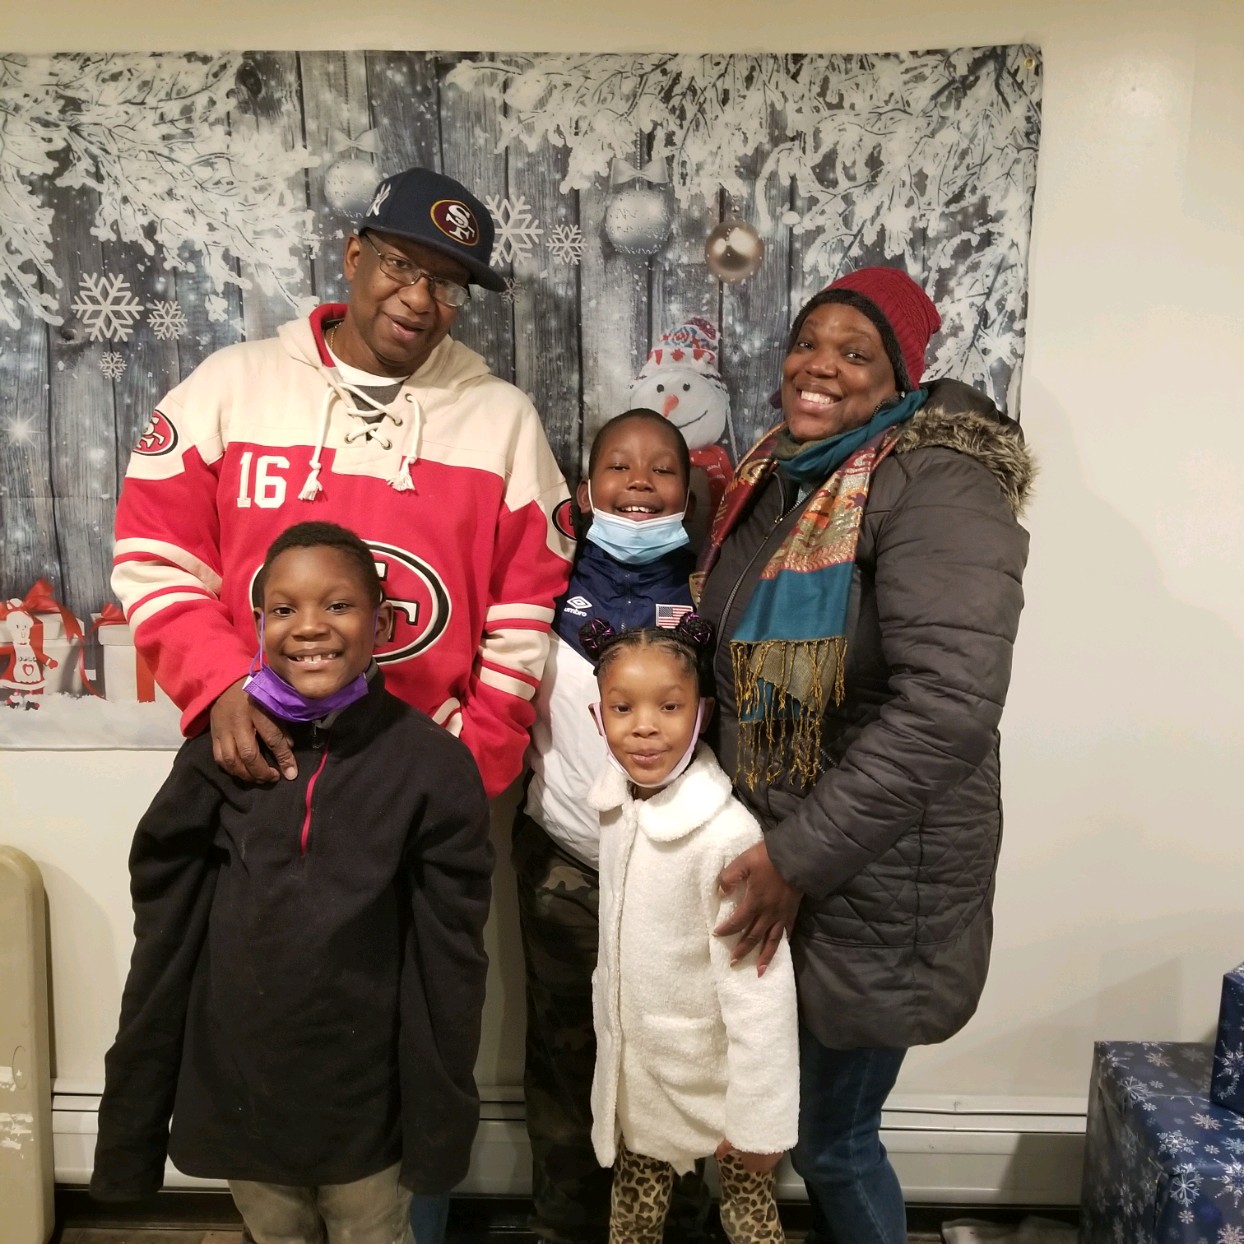 Bernard China and his wife, Constance, share a happy moment with three of their five children, Devin, 9, Josiah, 7, and Syvona, 6. Not pictured are their other two children, Ajalon, 20, and Ishmael, 14. Photo courtesy of NJ Sharing Network.